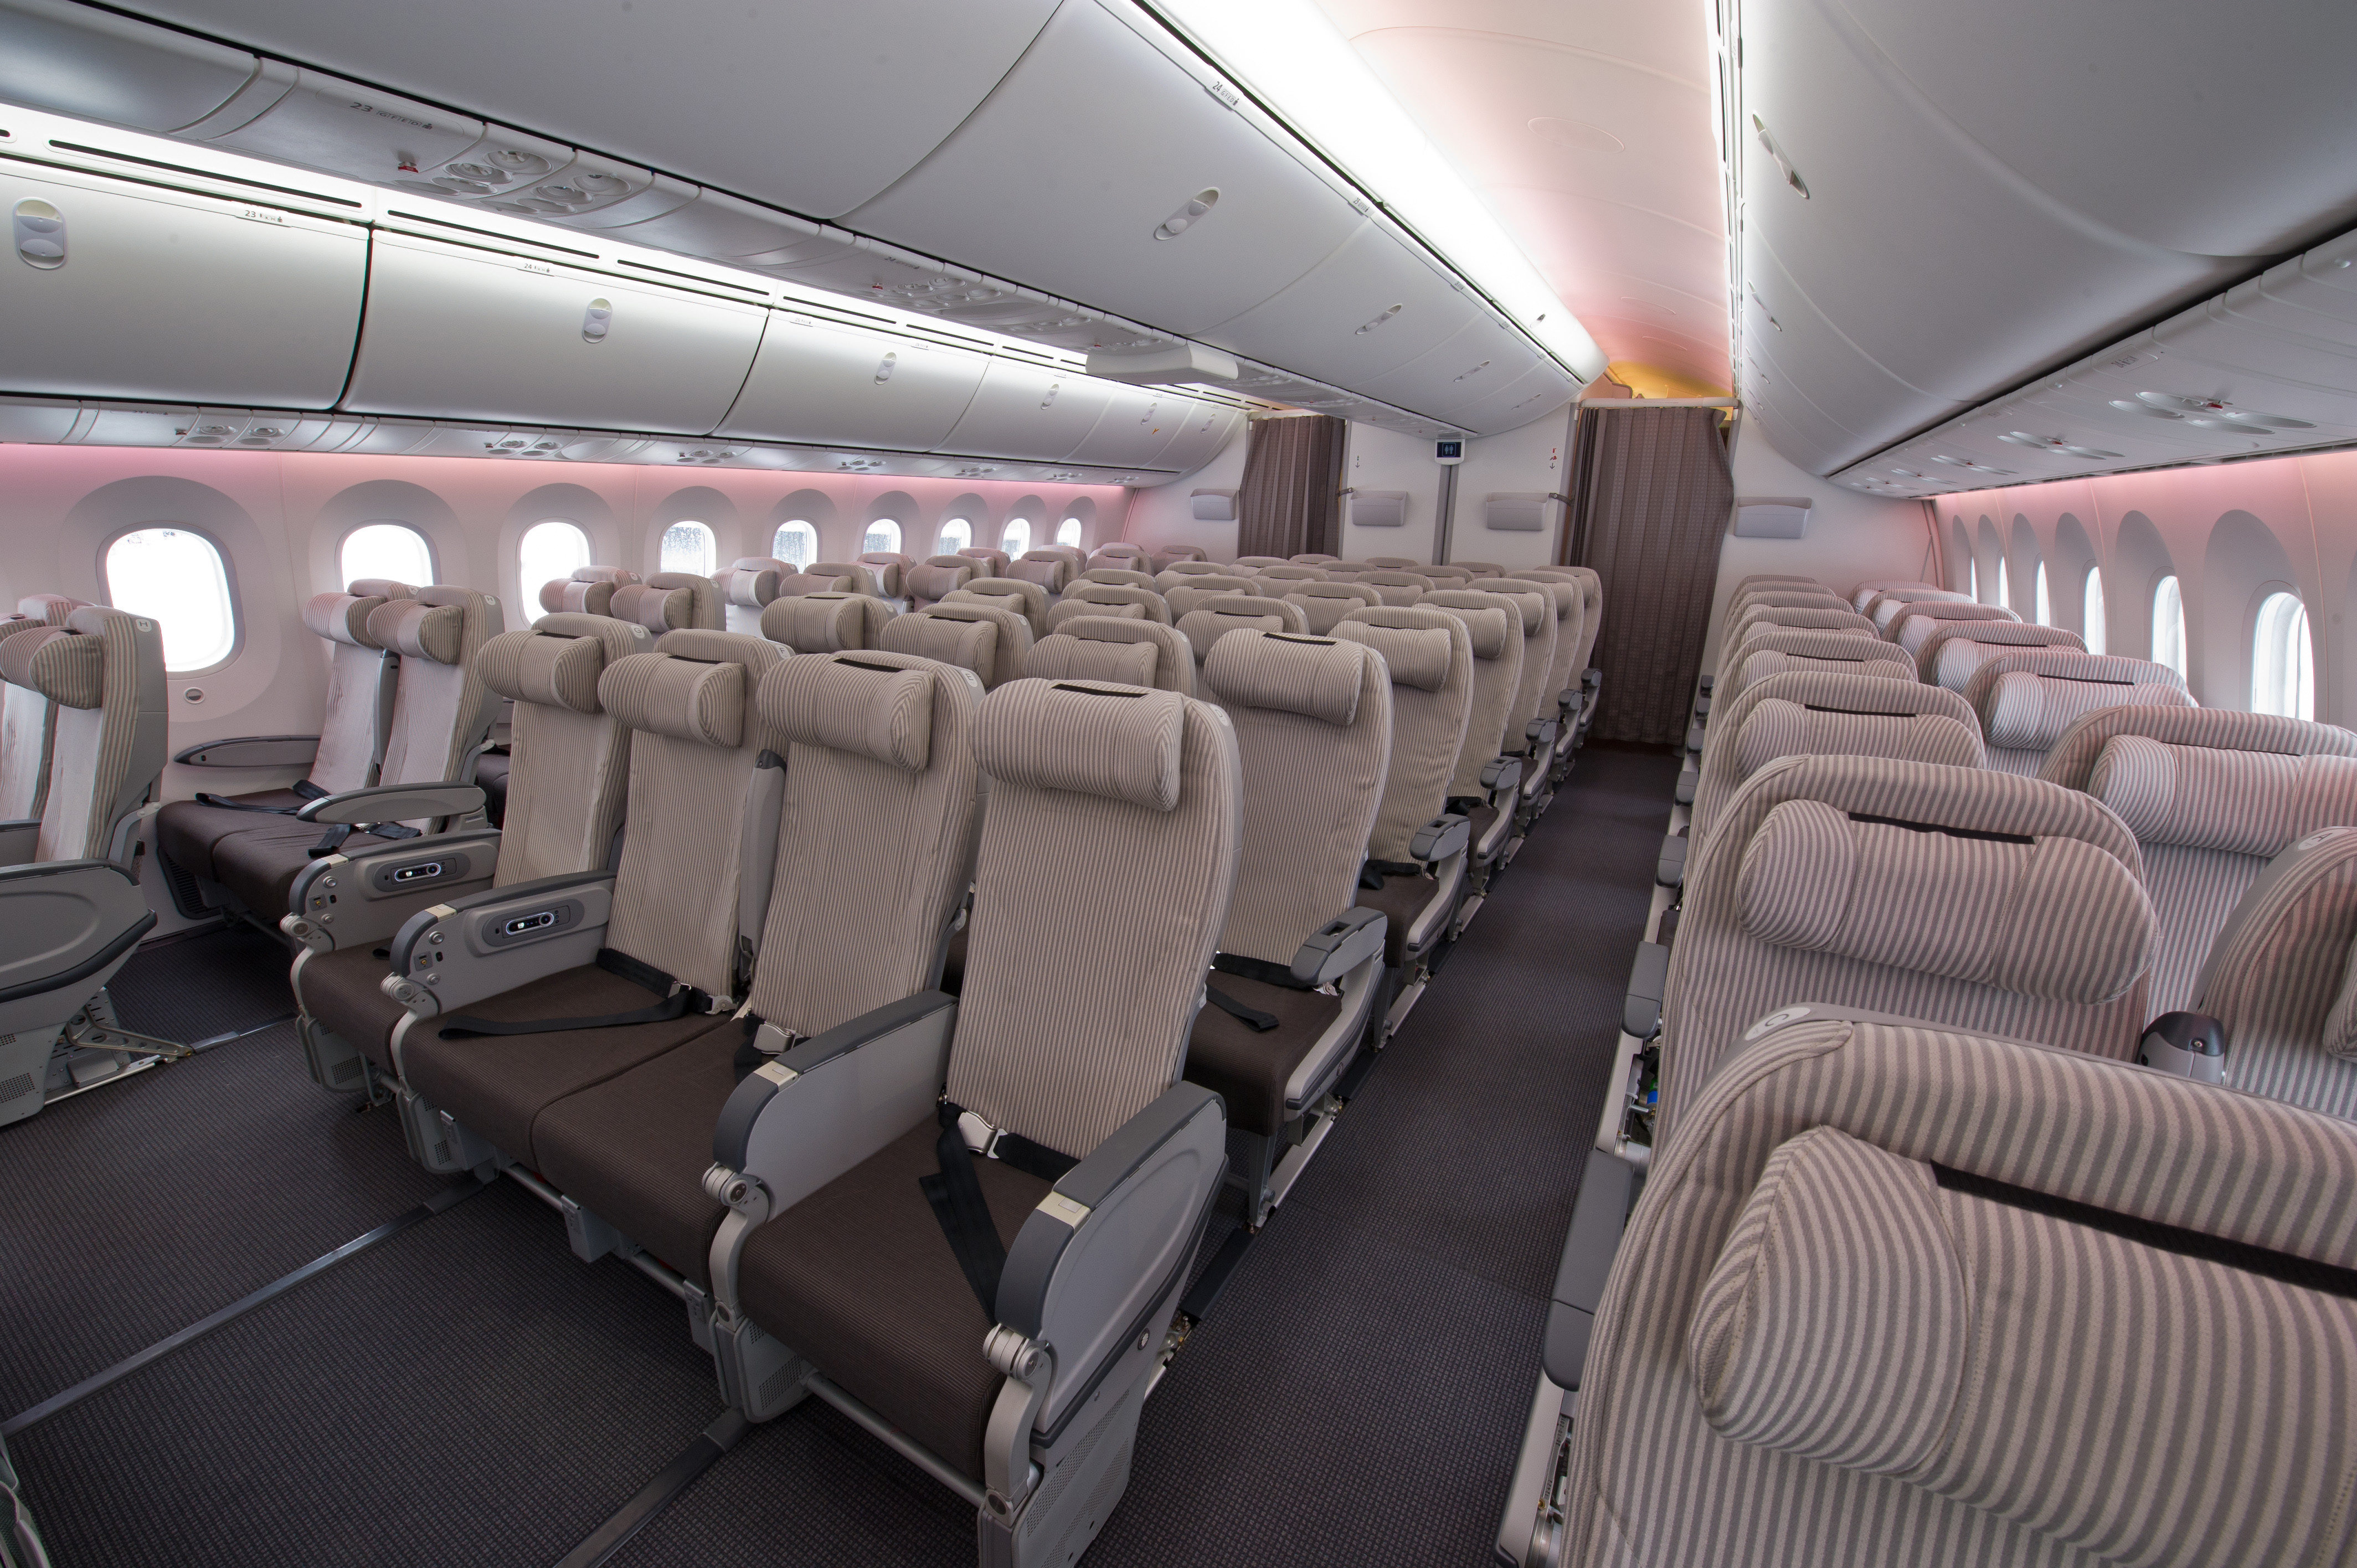 Jal 787 Ln 33 Interior Photography Airlinereporter